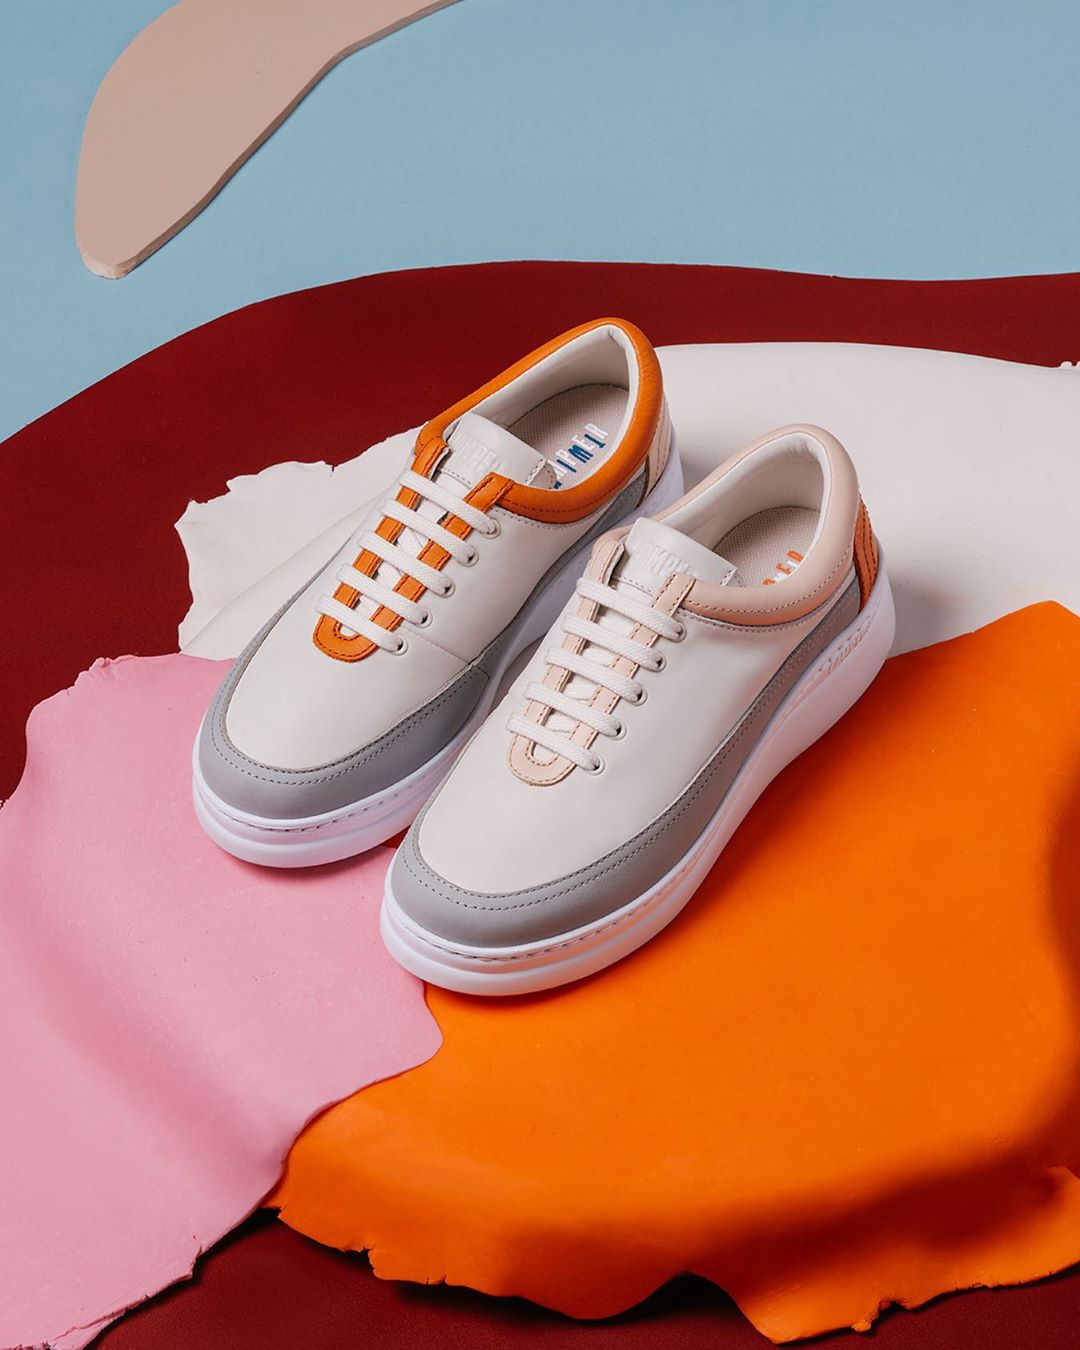 Camper - Runner Up is back with our TWINS in seasonal colors and enhanced @xlextralight technology to make it ultra lightweight that defines this reinvented Camper classic. #newcollection #campershoes